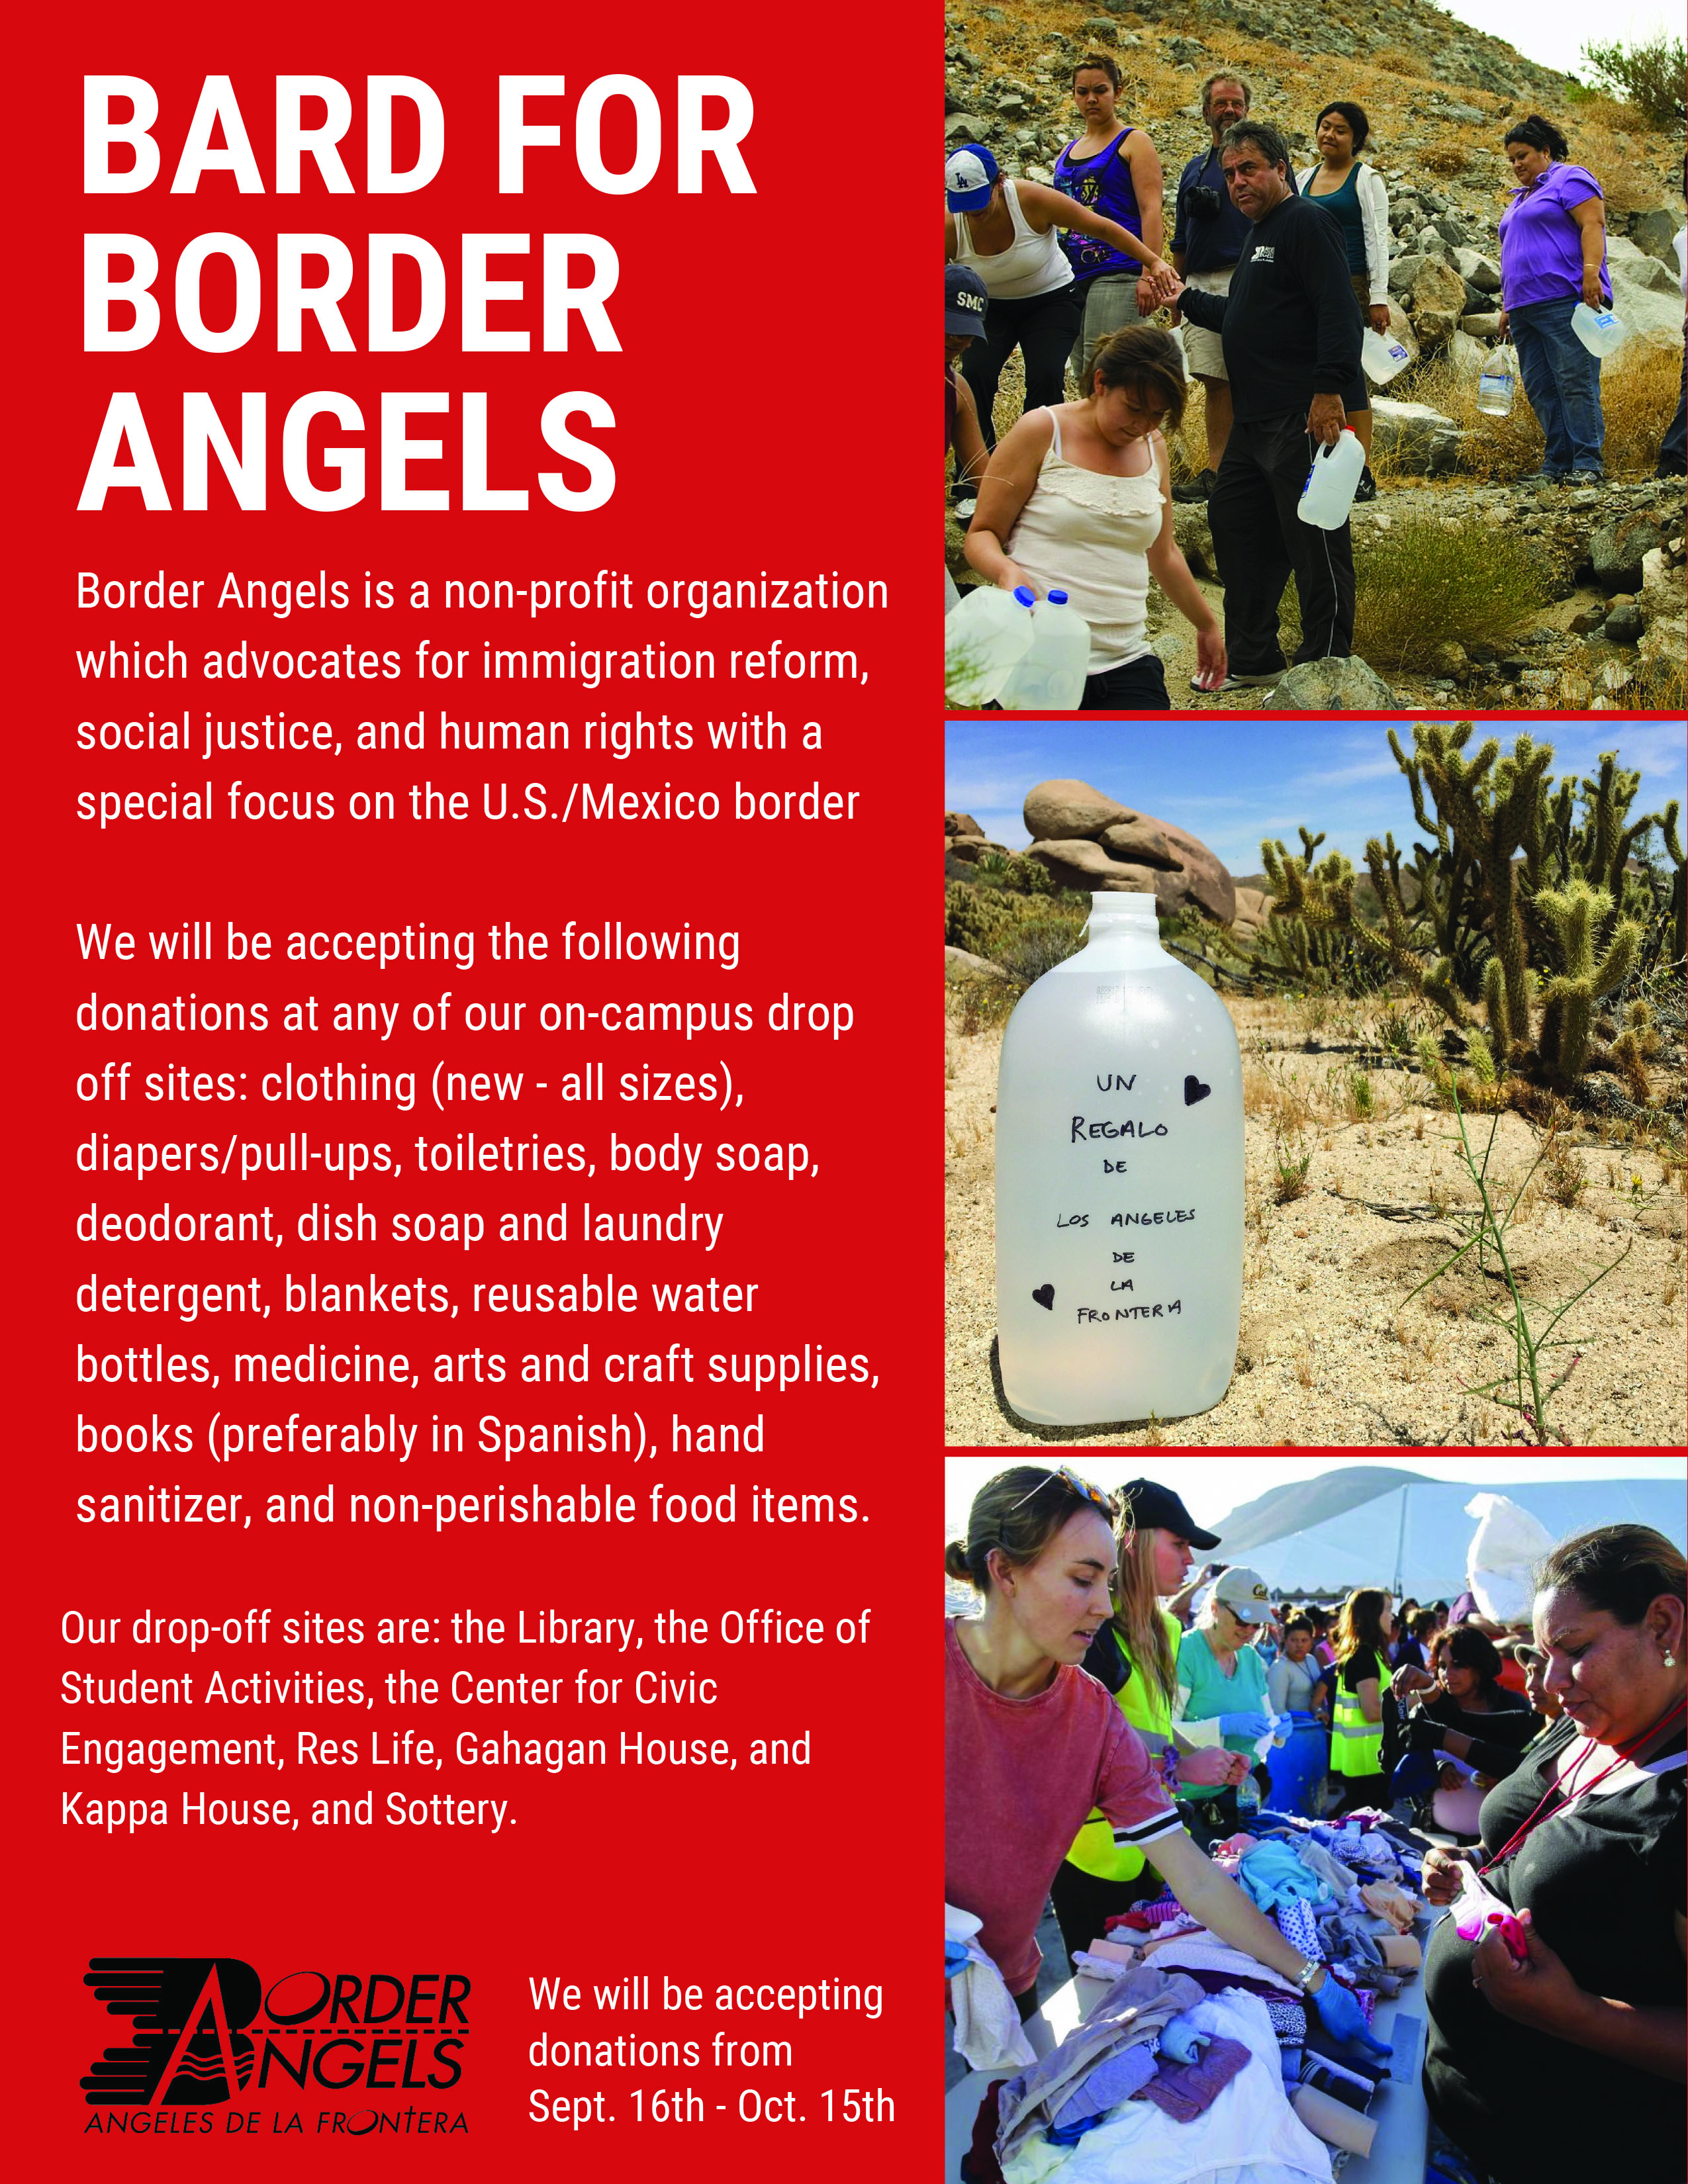 Donate to Bard for Border Angels